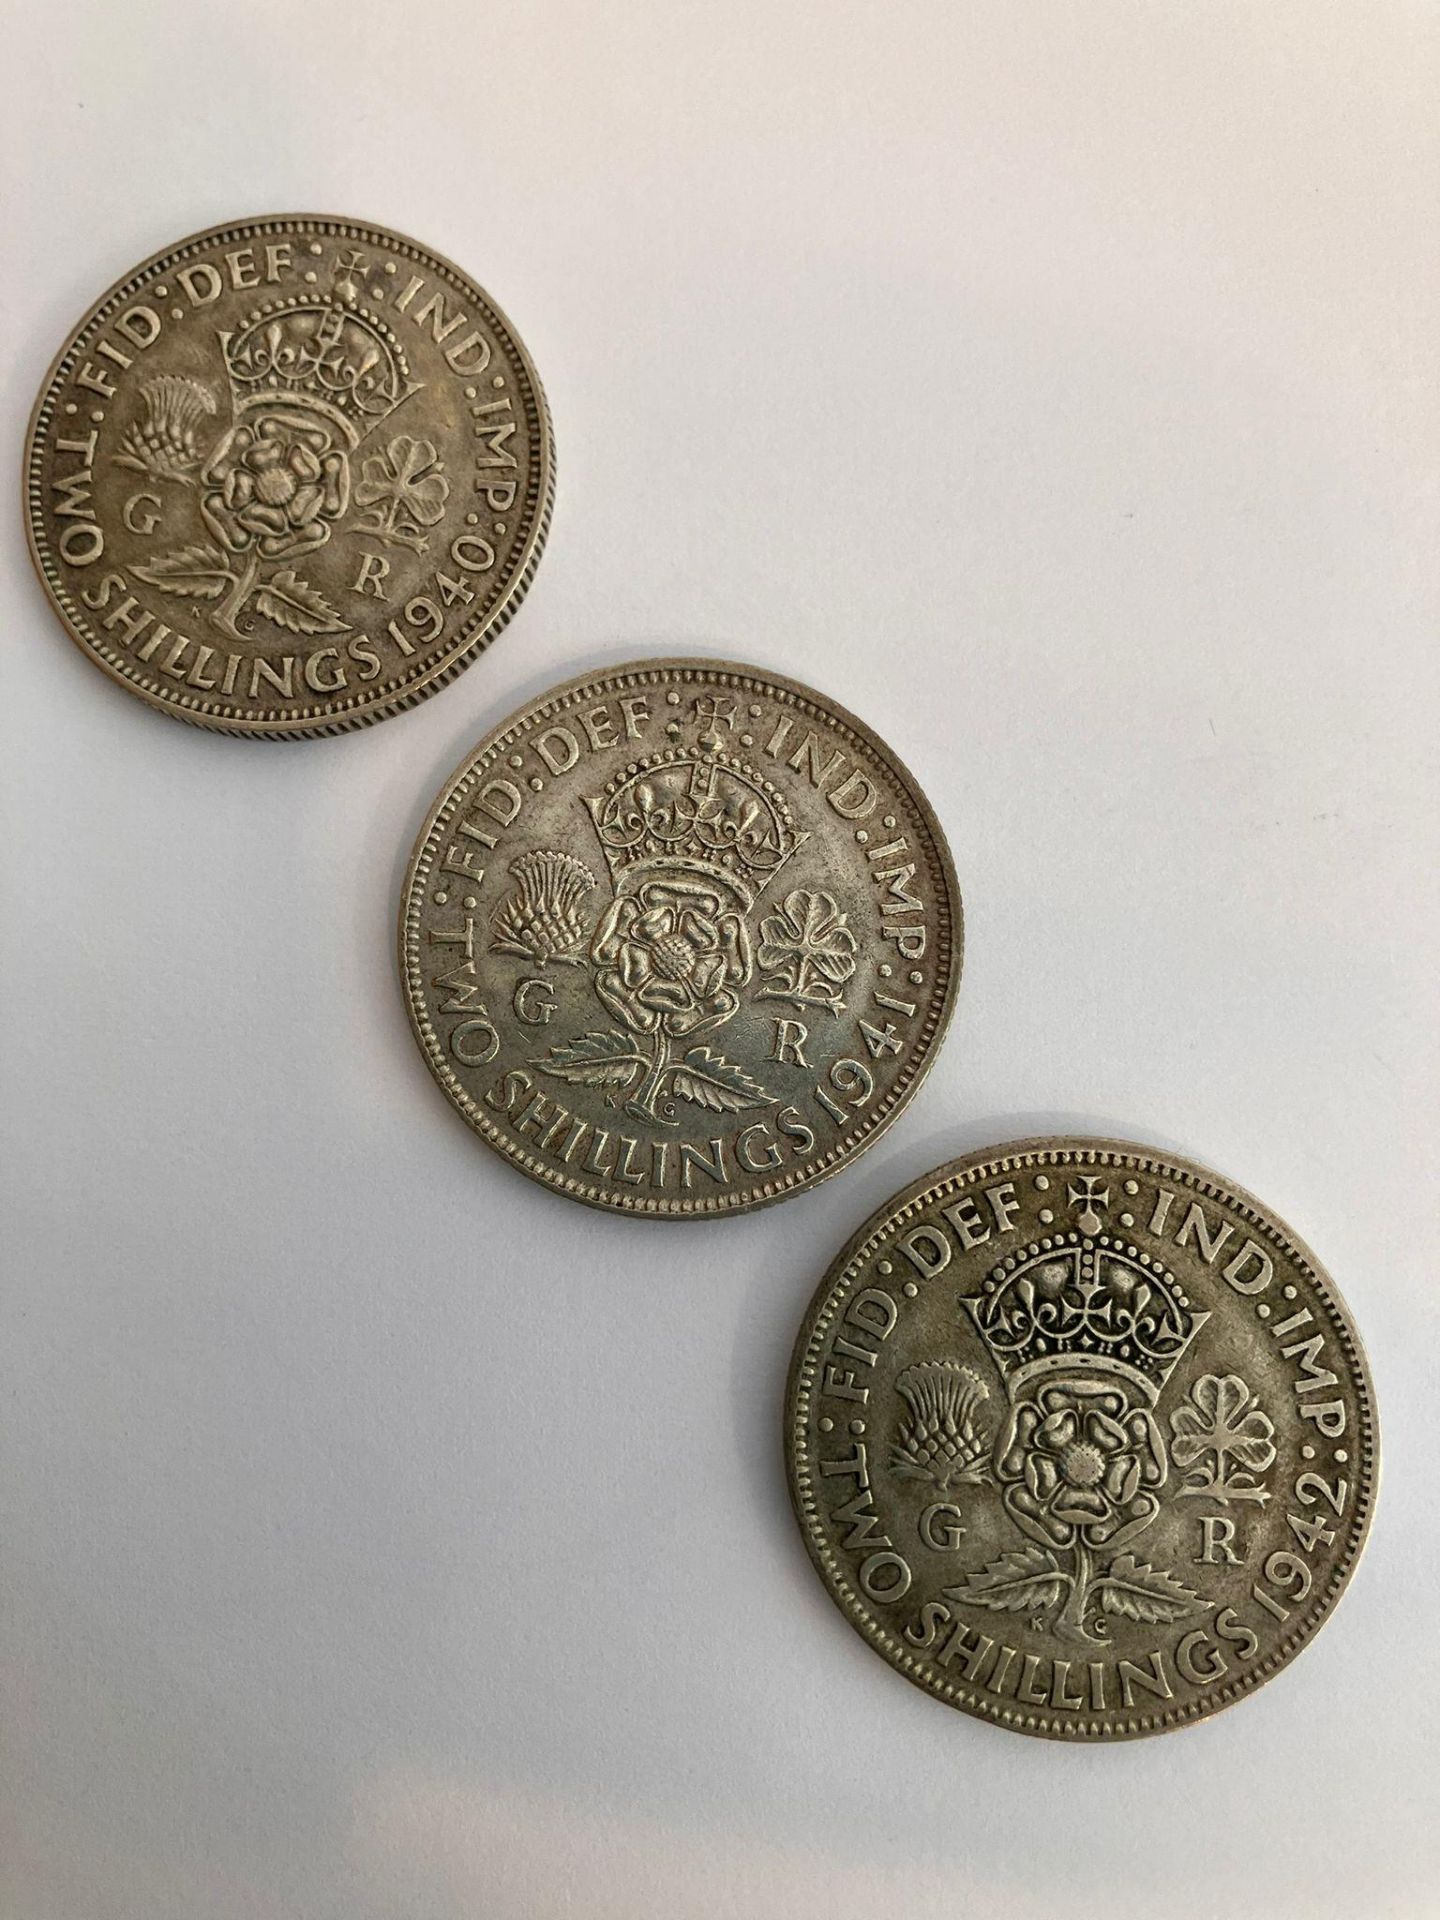 3 x WWII SILVER FLORINS. Consecutive years 1941,1942,1943, all in very fine/extra fine condition.